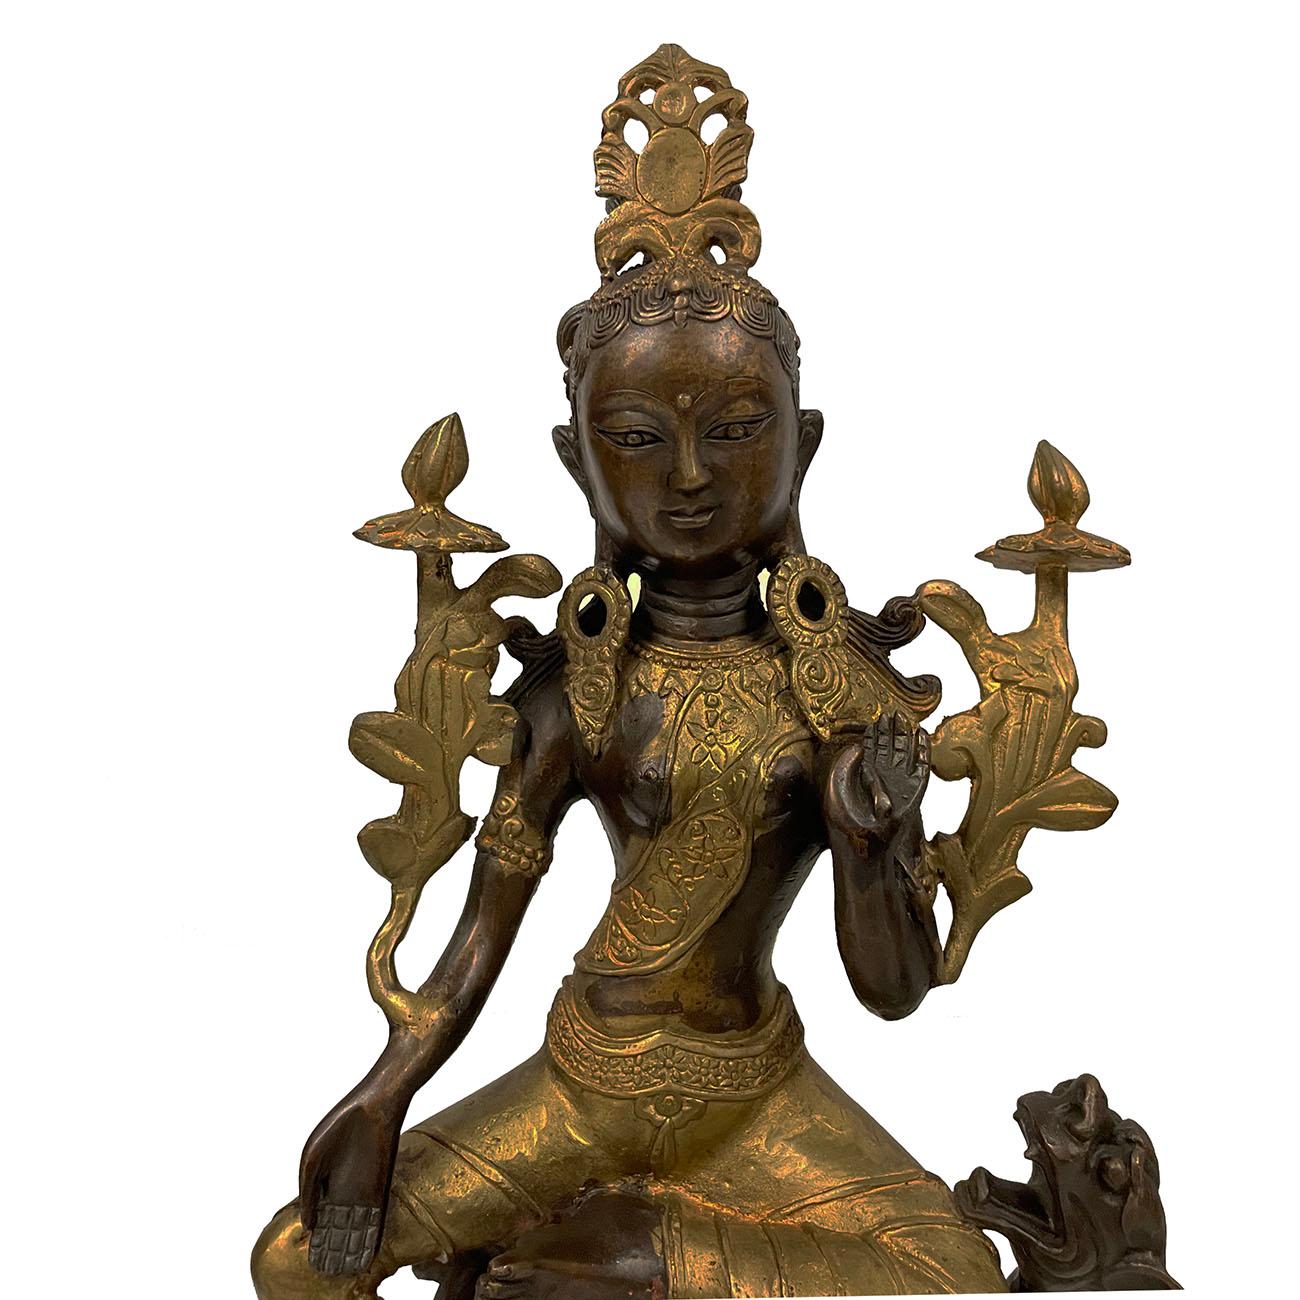 In Buddhism, Tara is a savior deity (savioress) who liberates souls from suffering. She is recognized as a Bodhisattva in Mahayana Buddhism and as a Buddha and the mother of Buddhas in Esoteric Buddhism, particularly Vajrayana Buddhism (also known